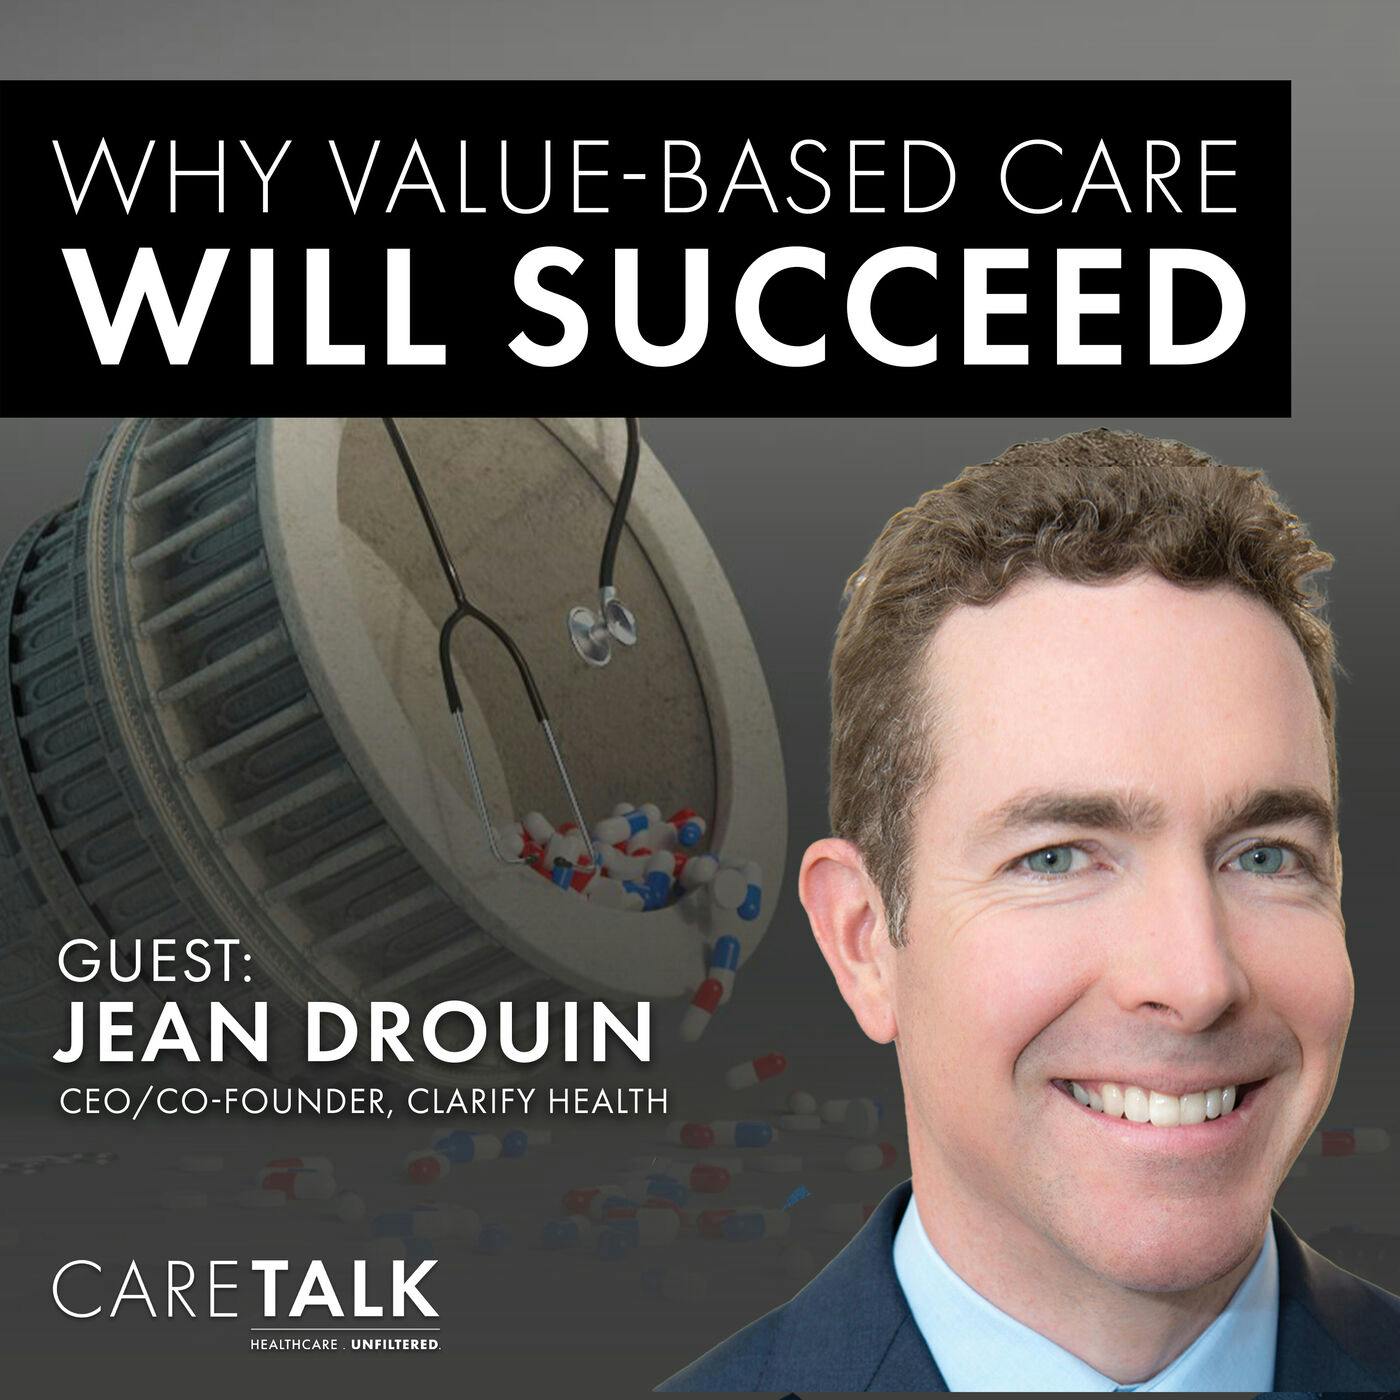 CareTalk: Jean Drouin on Why Value-Based Care Will Succeed